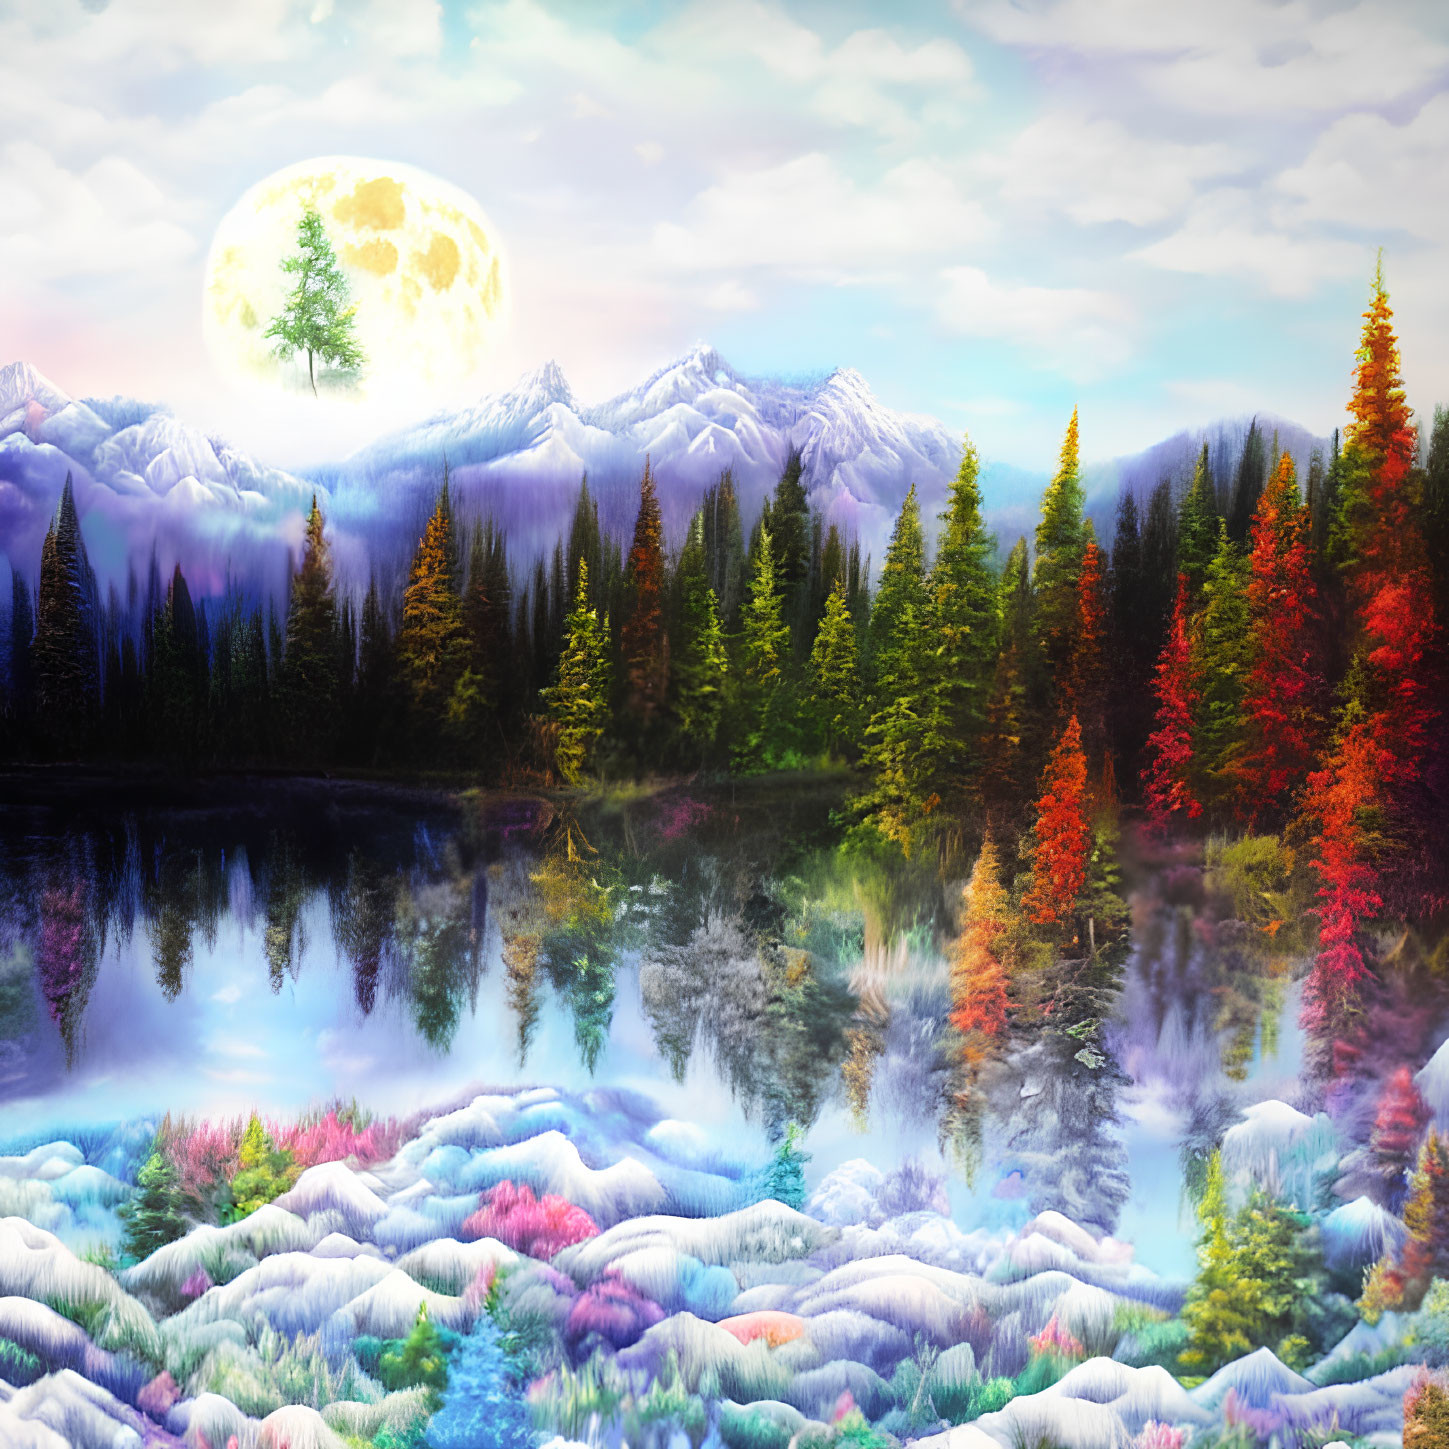 Colorful Trees Reflecting in Lake with Snow-Capped Mountains under Full Moon